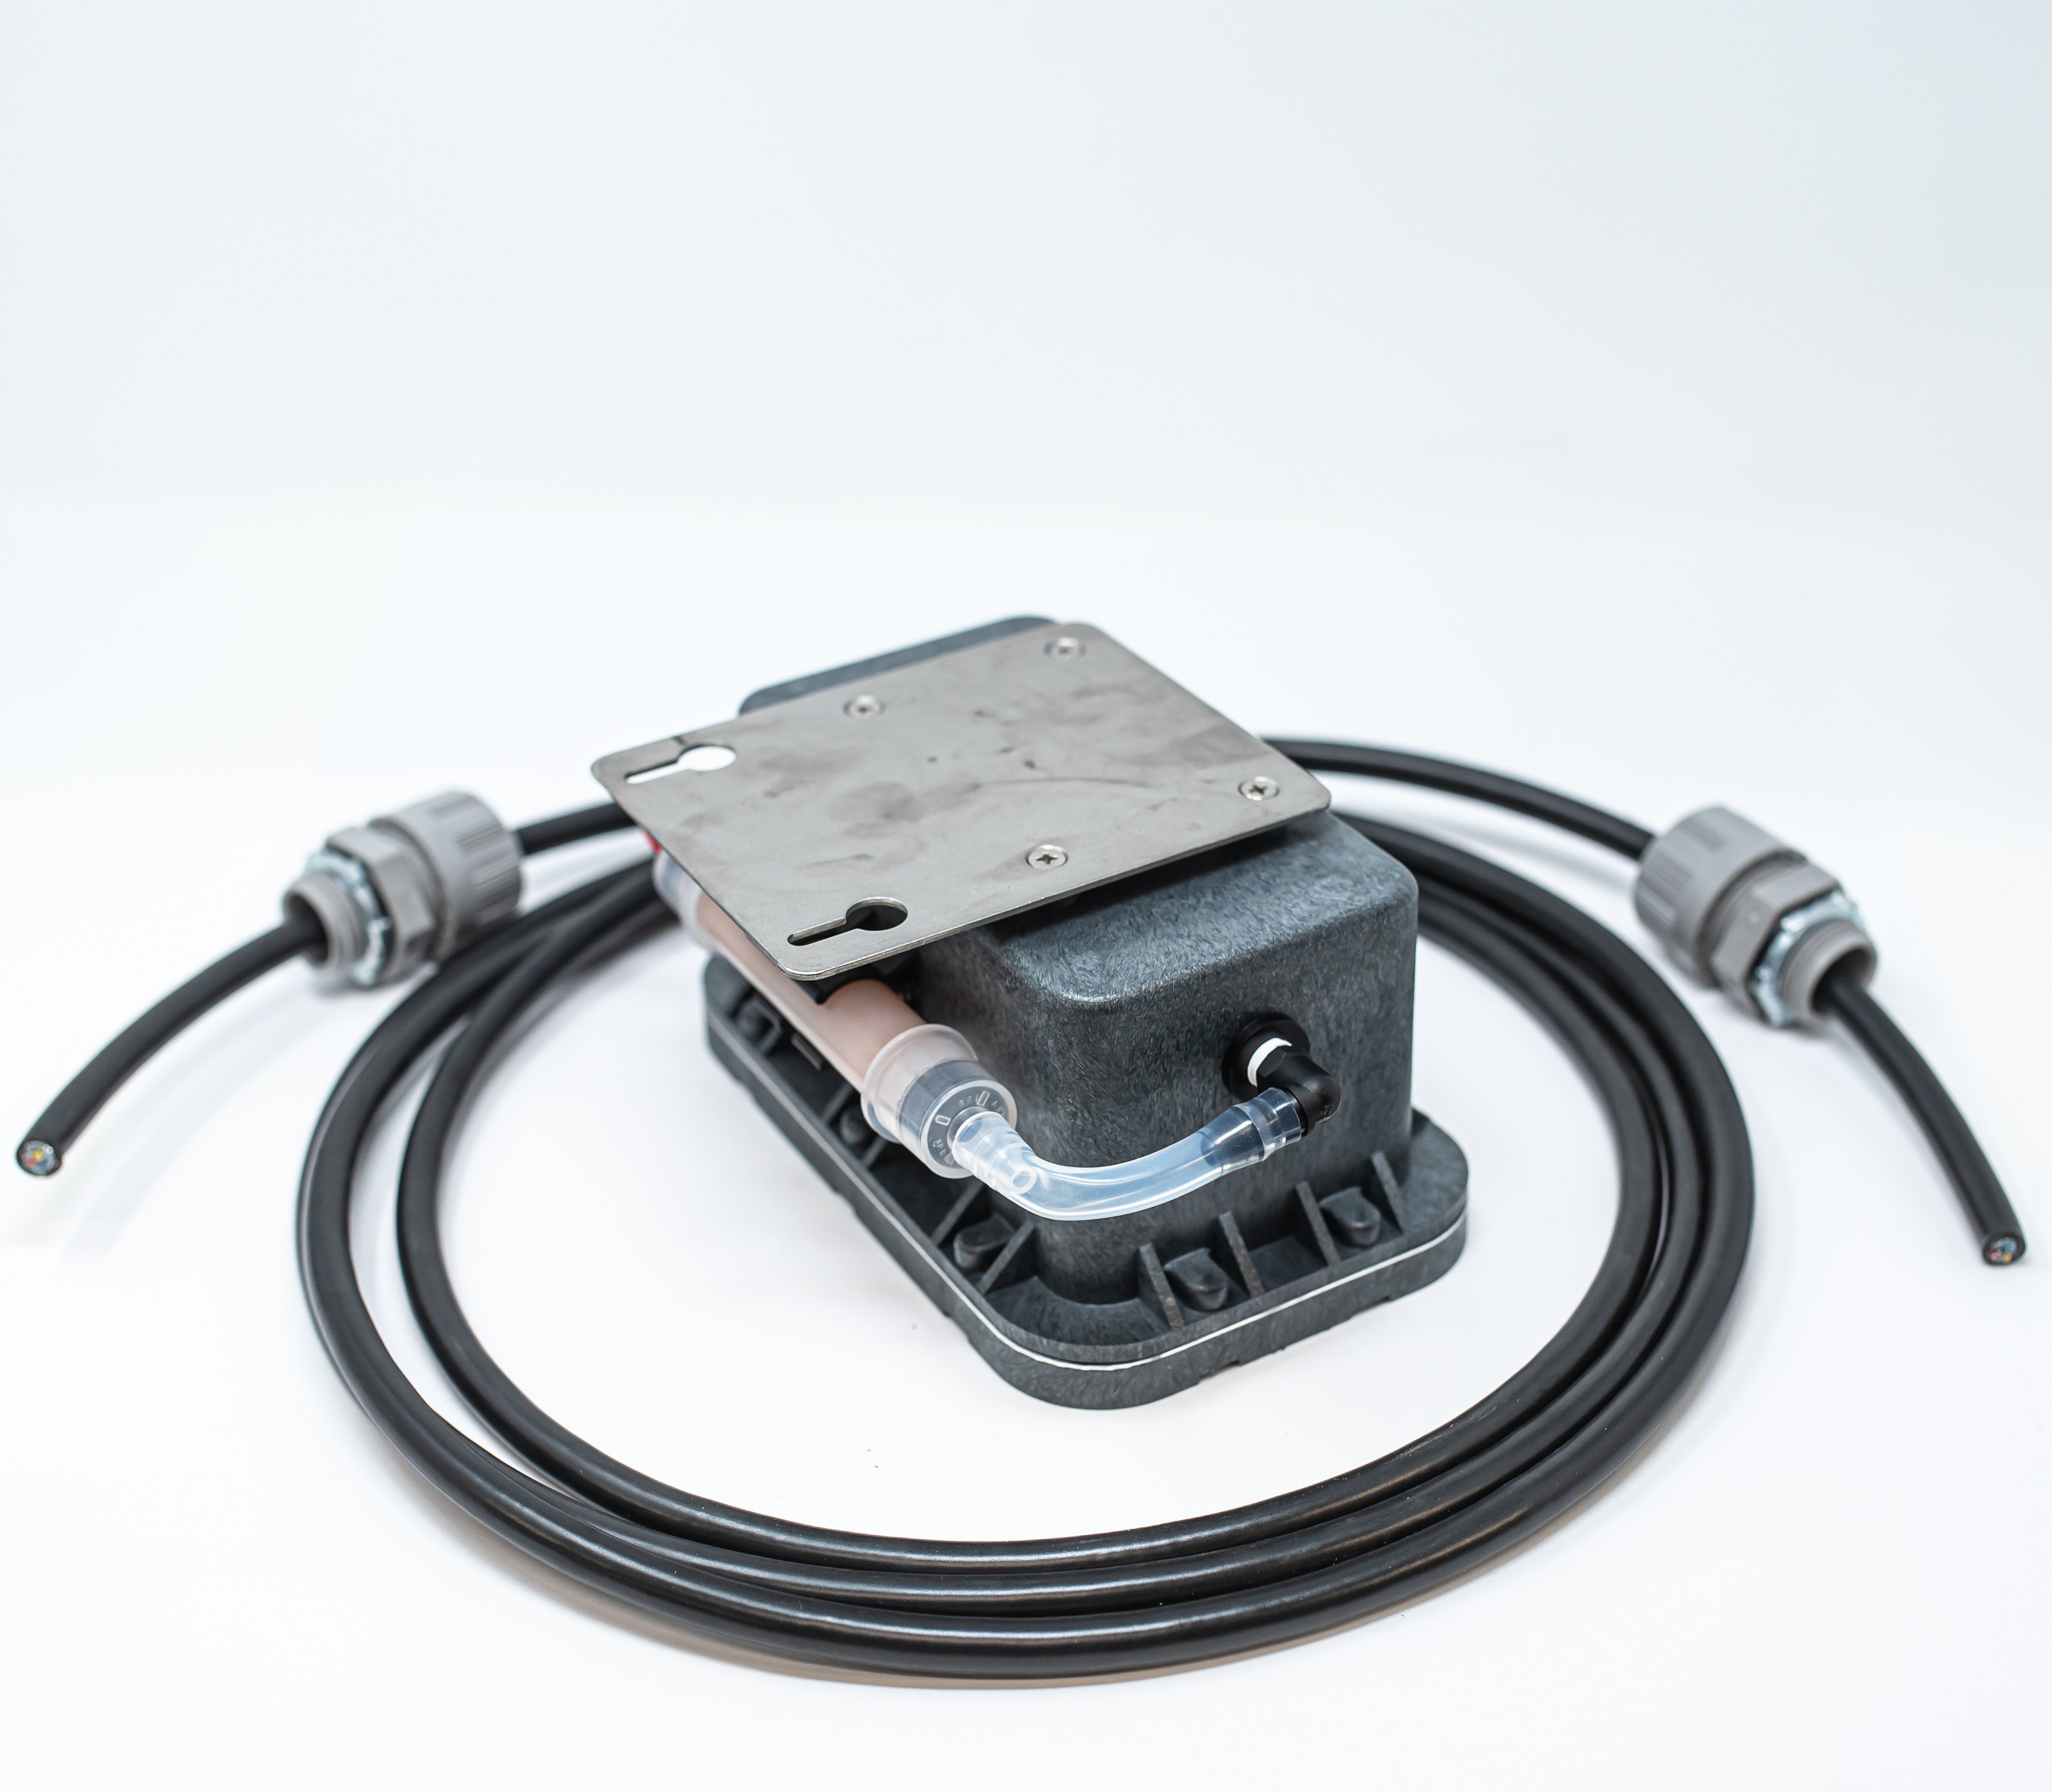 TIENet™ Network Expansion Box with 10 Ft. Cable and Desiccator